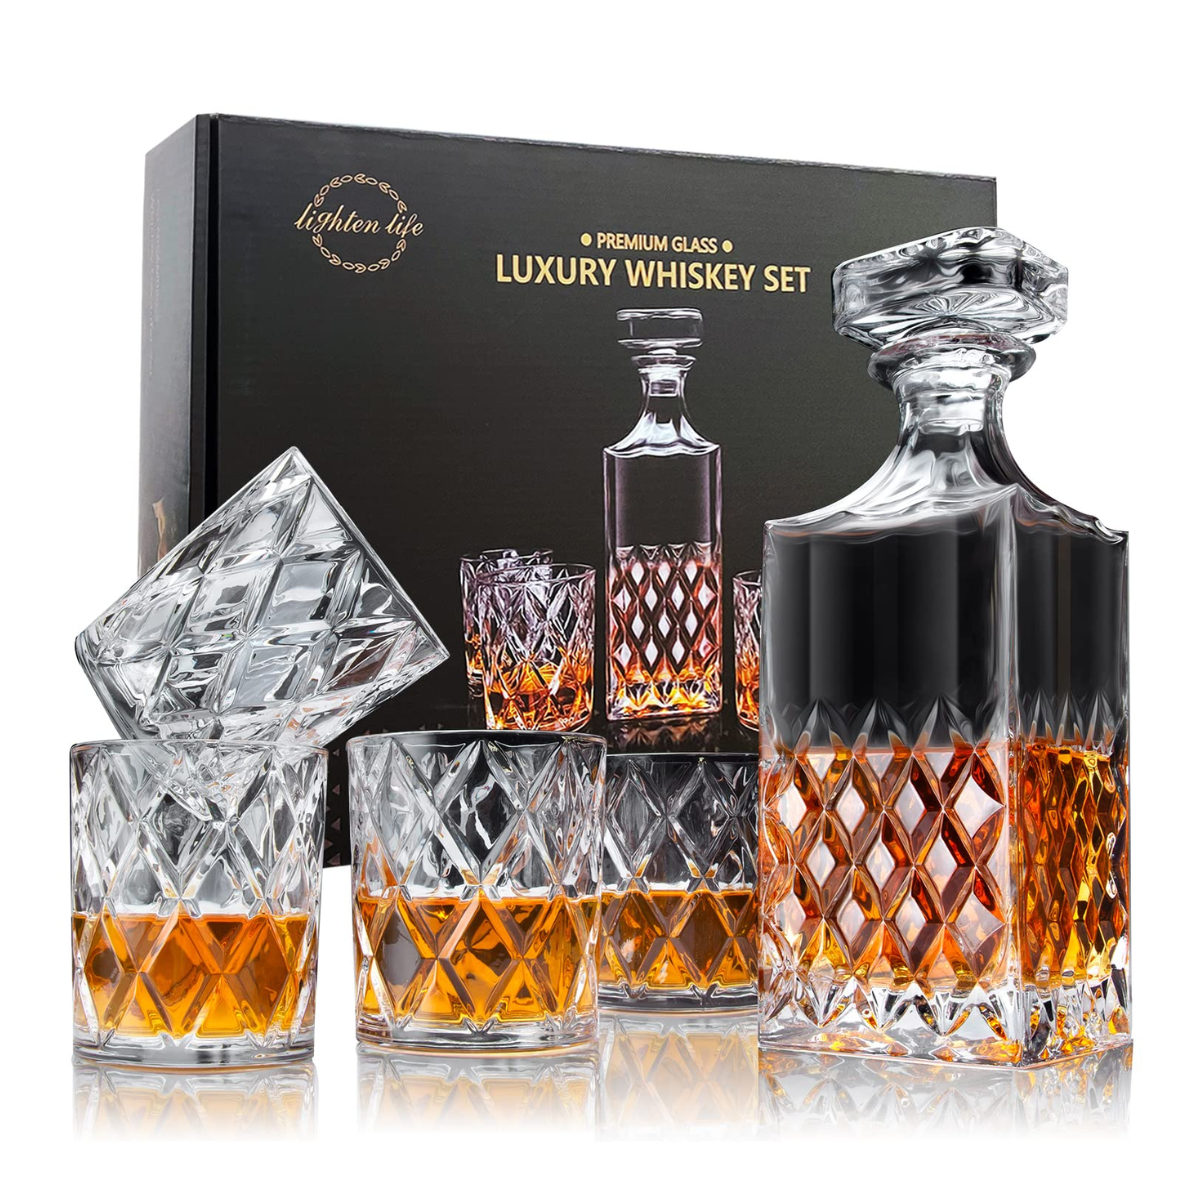 3. Raise a Glass to Love: Unforgettable Premium Whiskey Decanter Set for Anniversary Gifts